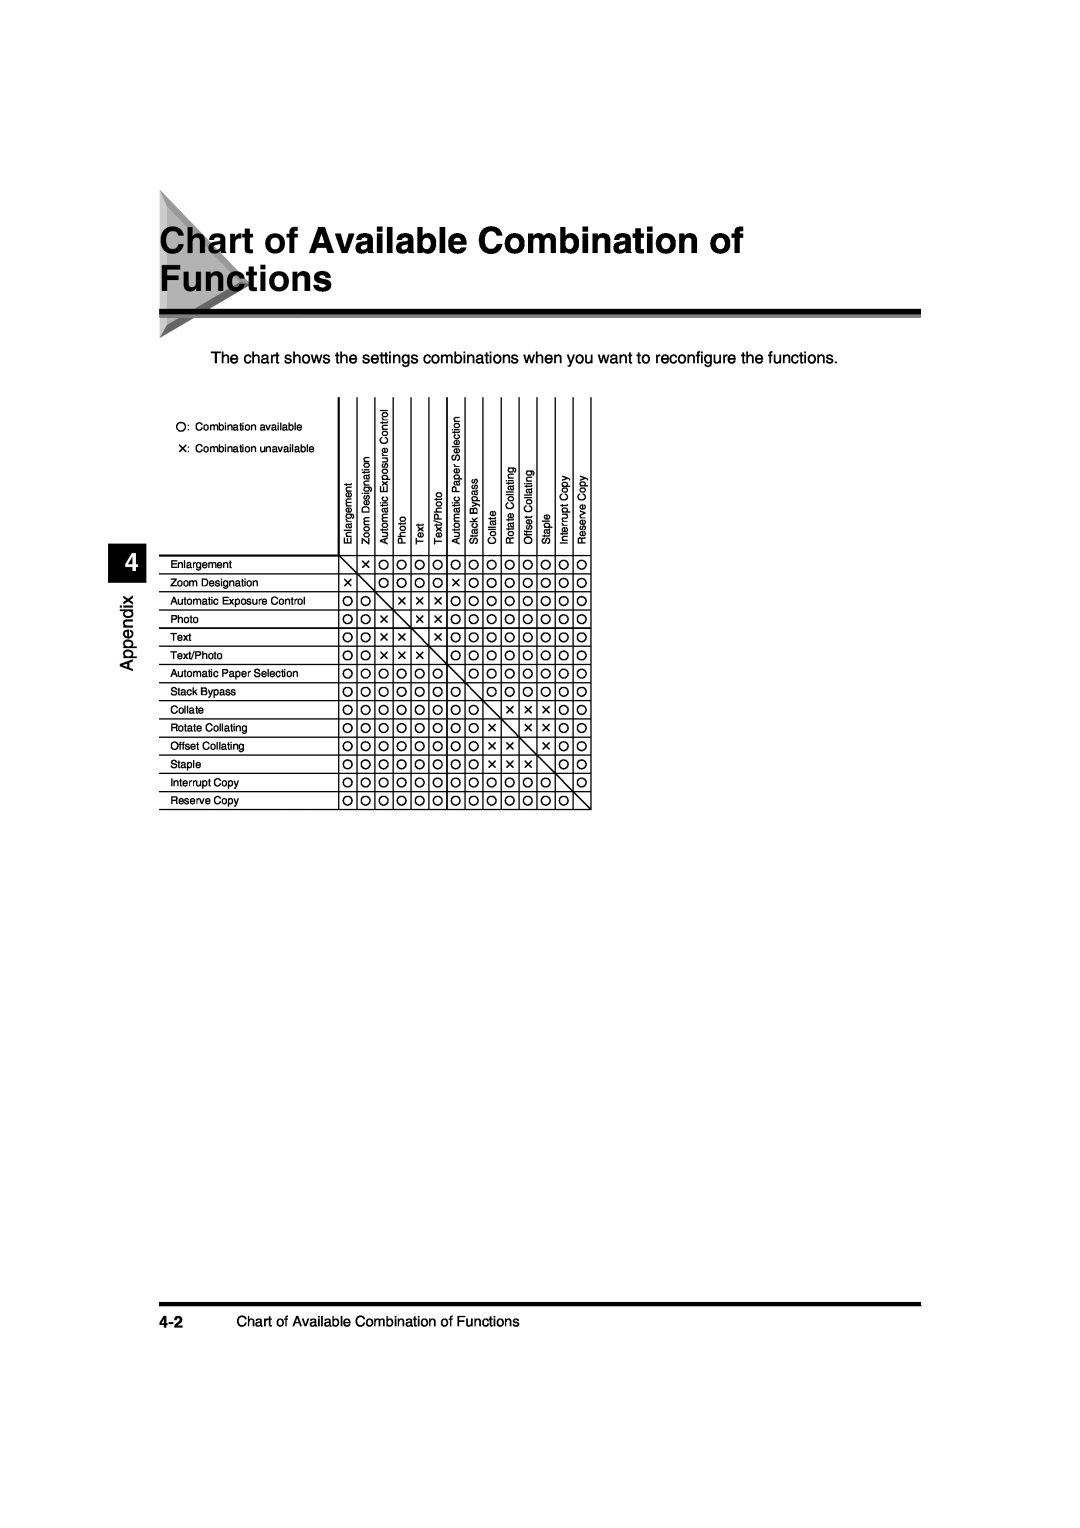 Canon IR1600 manual Chart of Available Combination of Functions, Appendix 